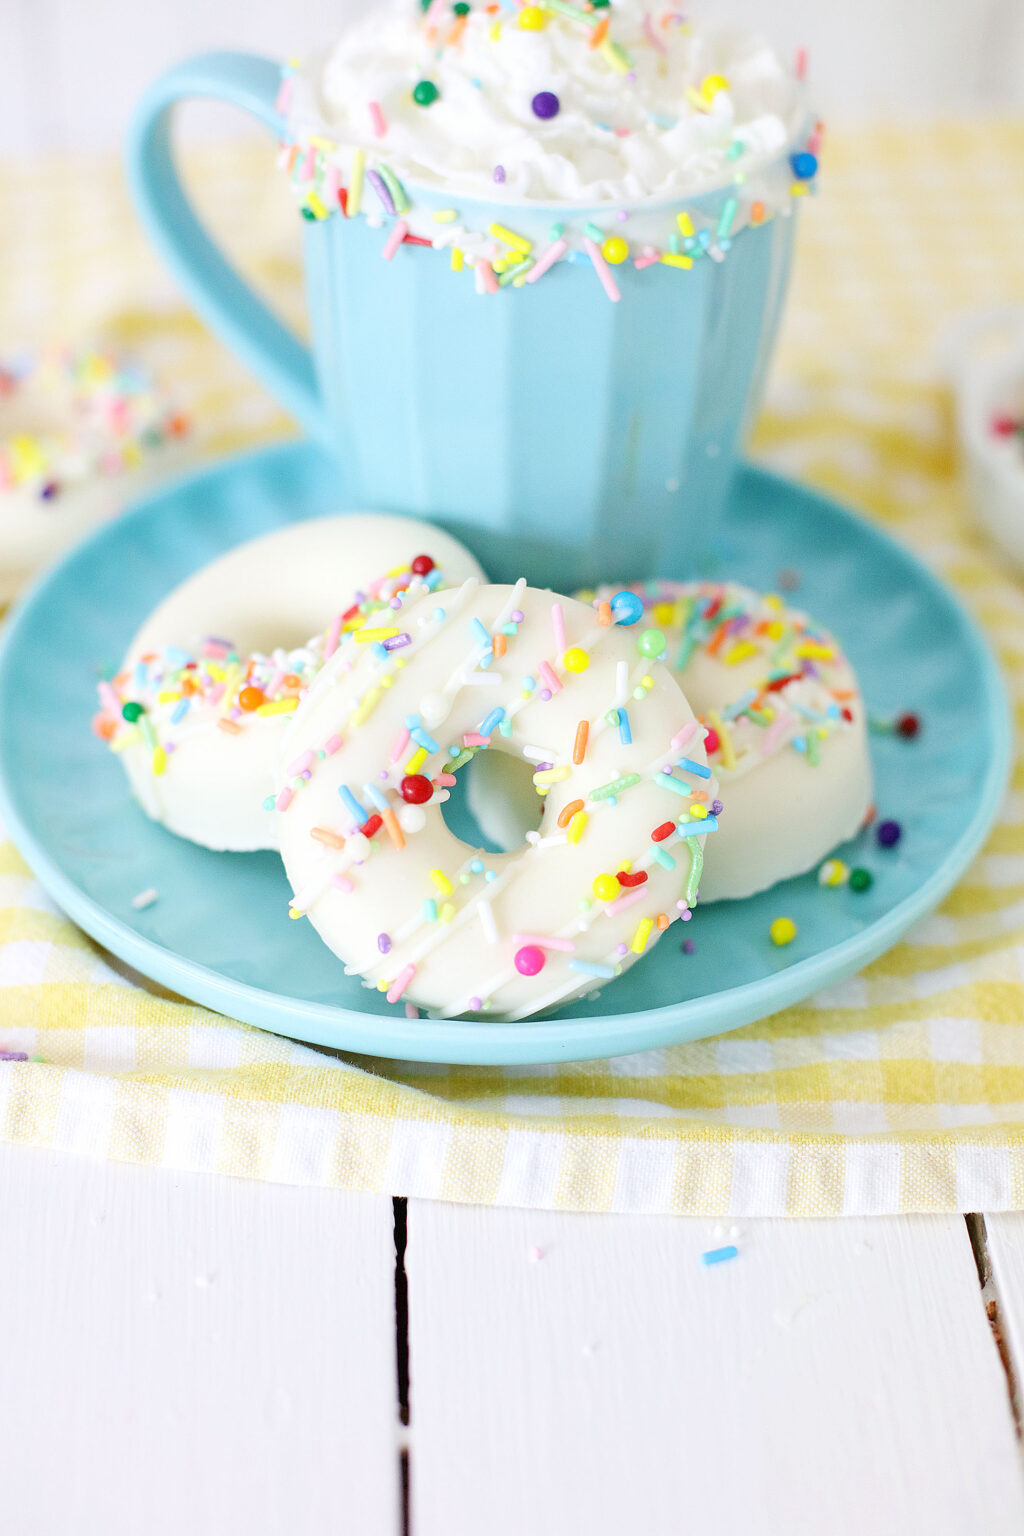 white chocolate donut hot cocoa bombs on blue plate